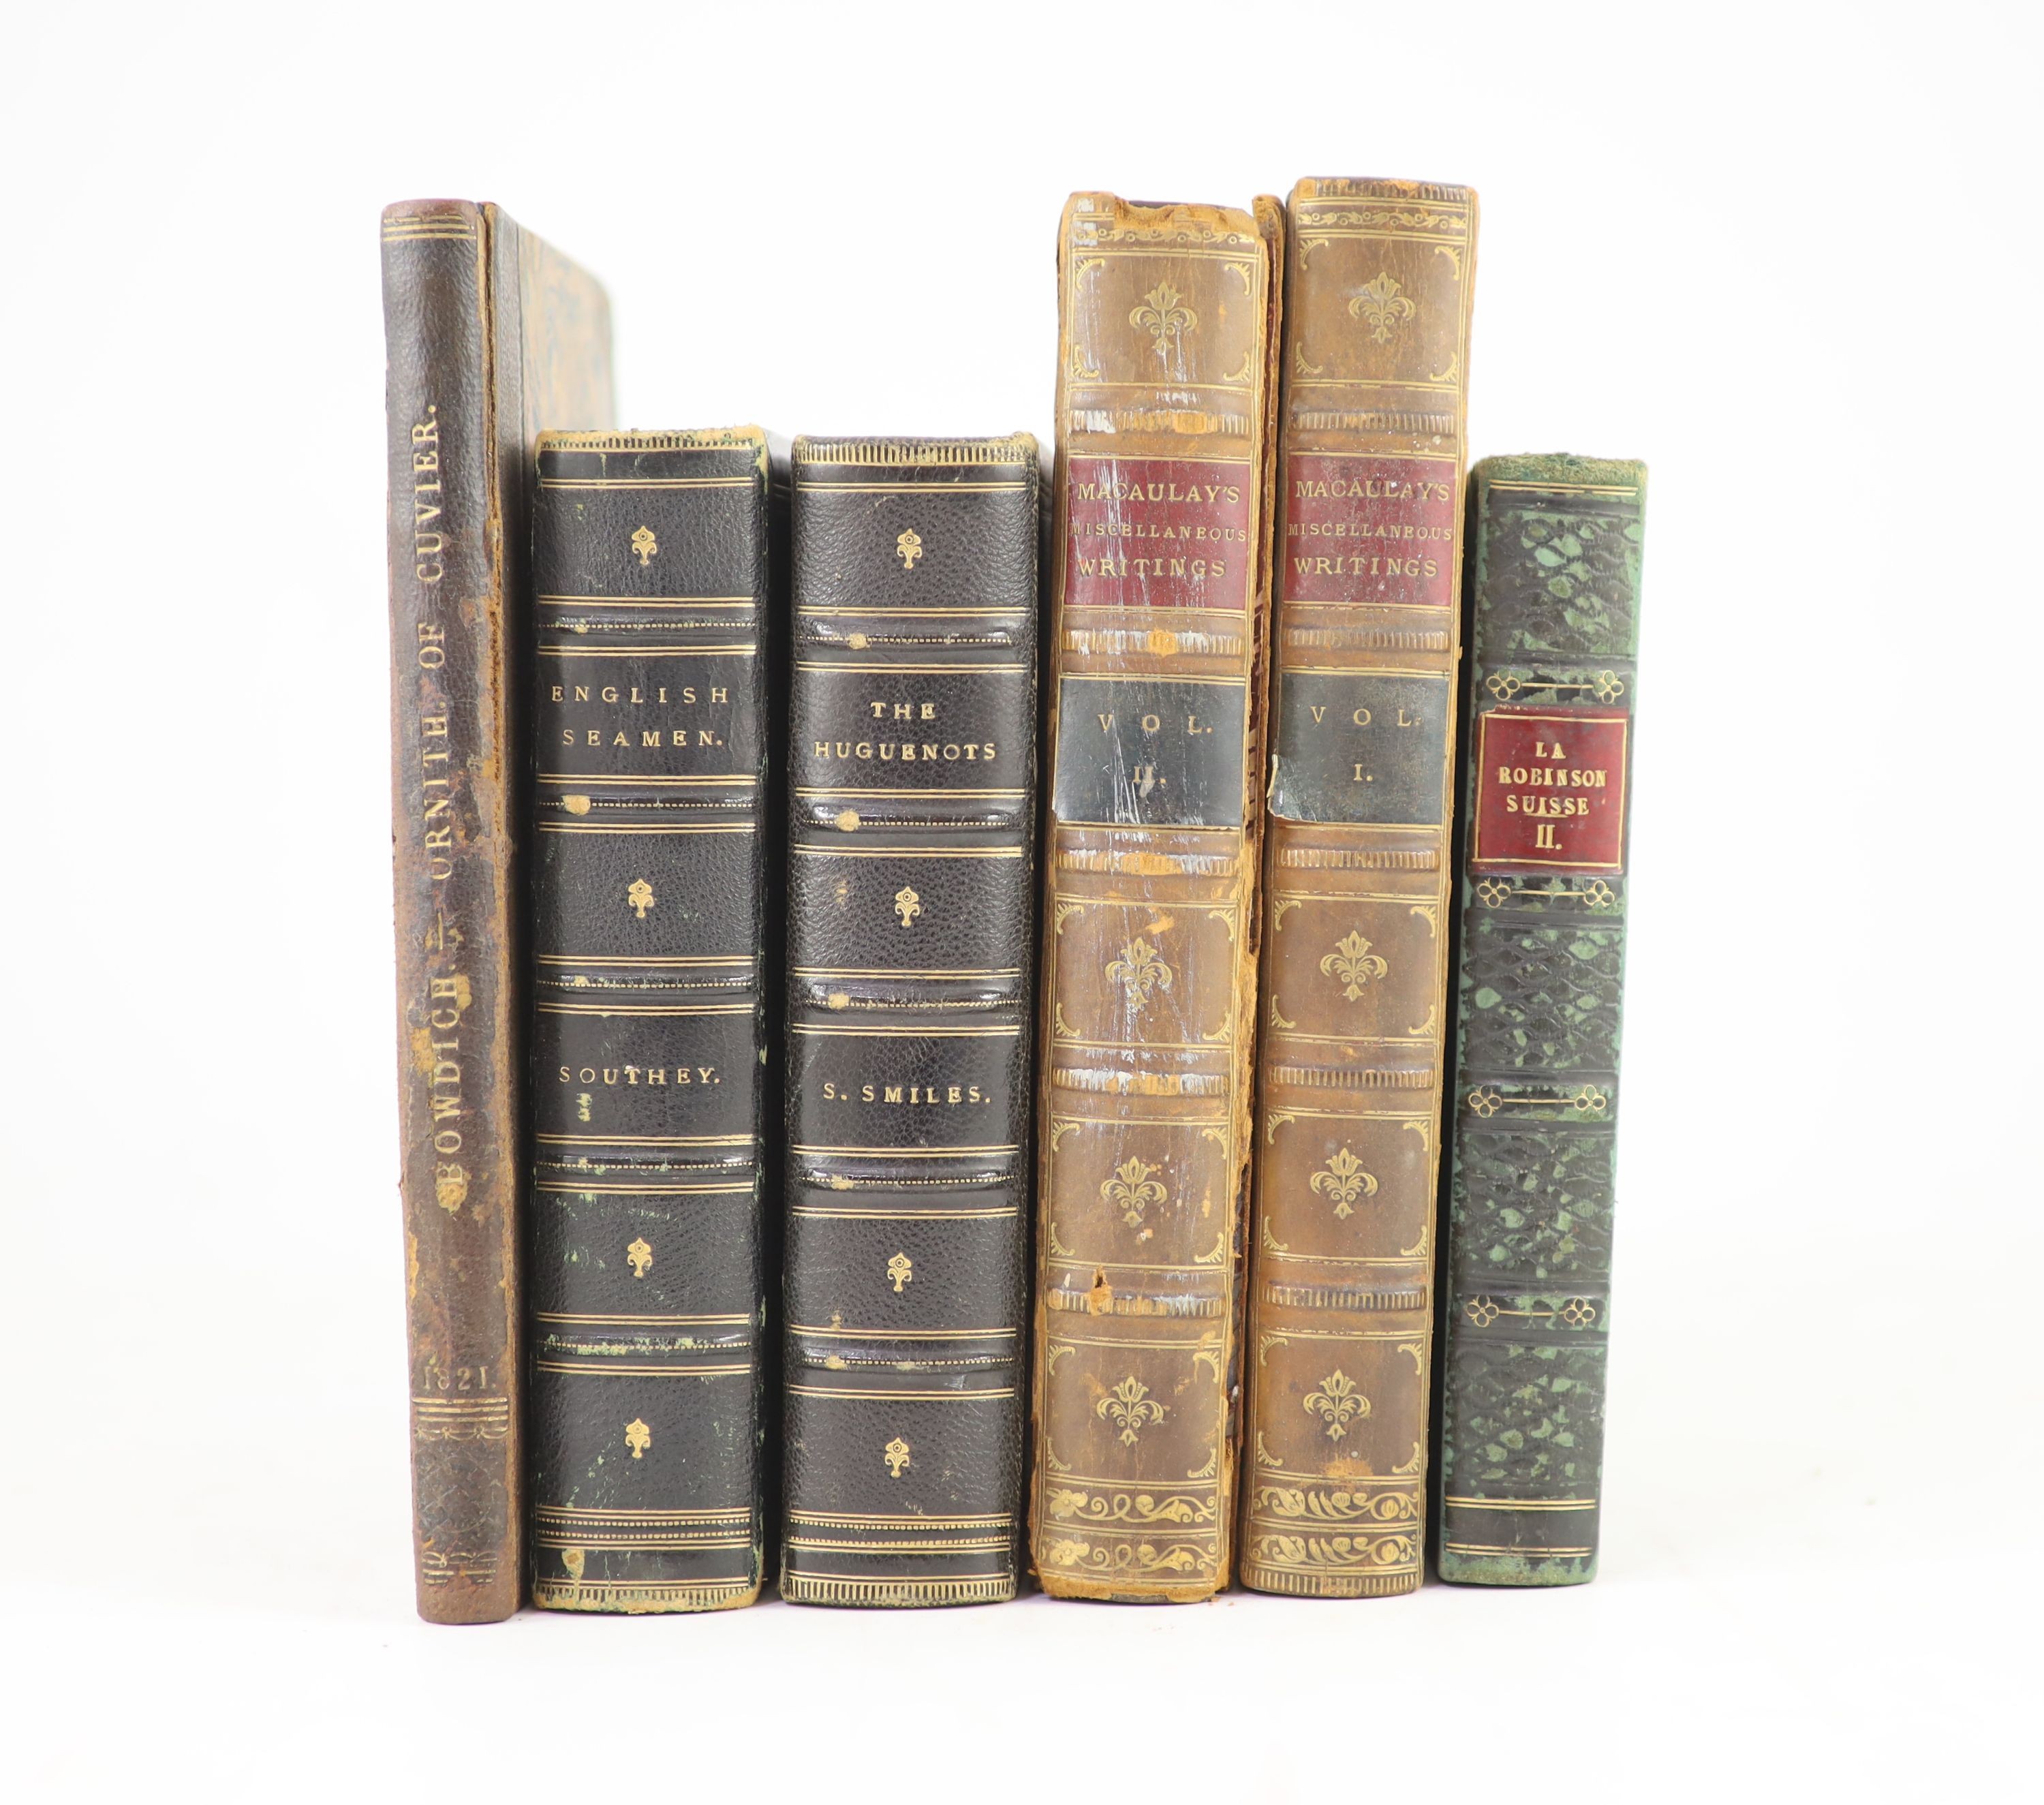 Bowdich, T. Edward – An Introduction to the Ornithology of Cuvier, for the use of students and Travellers. Complete with 16 illustrated plates plus 4 folding. Half morocco and marbled paper, gilt tooled spine with letter